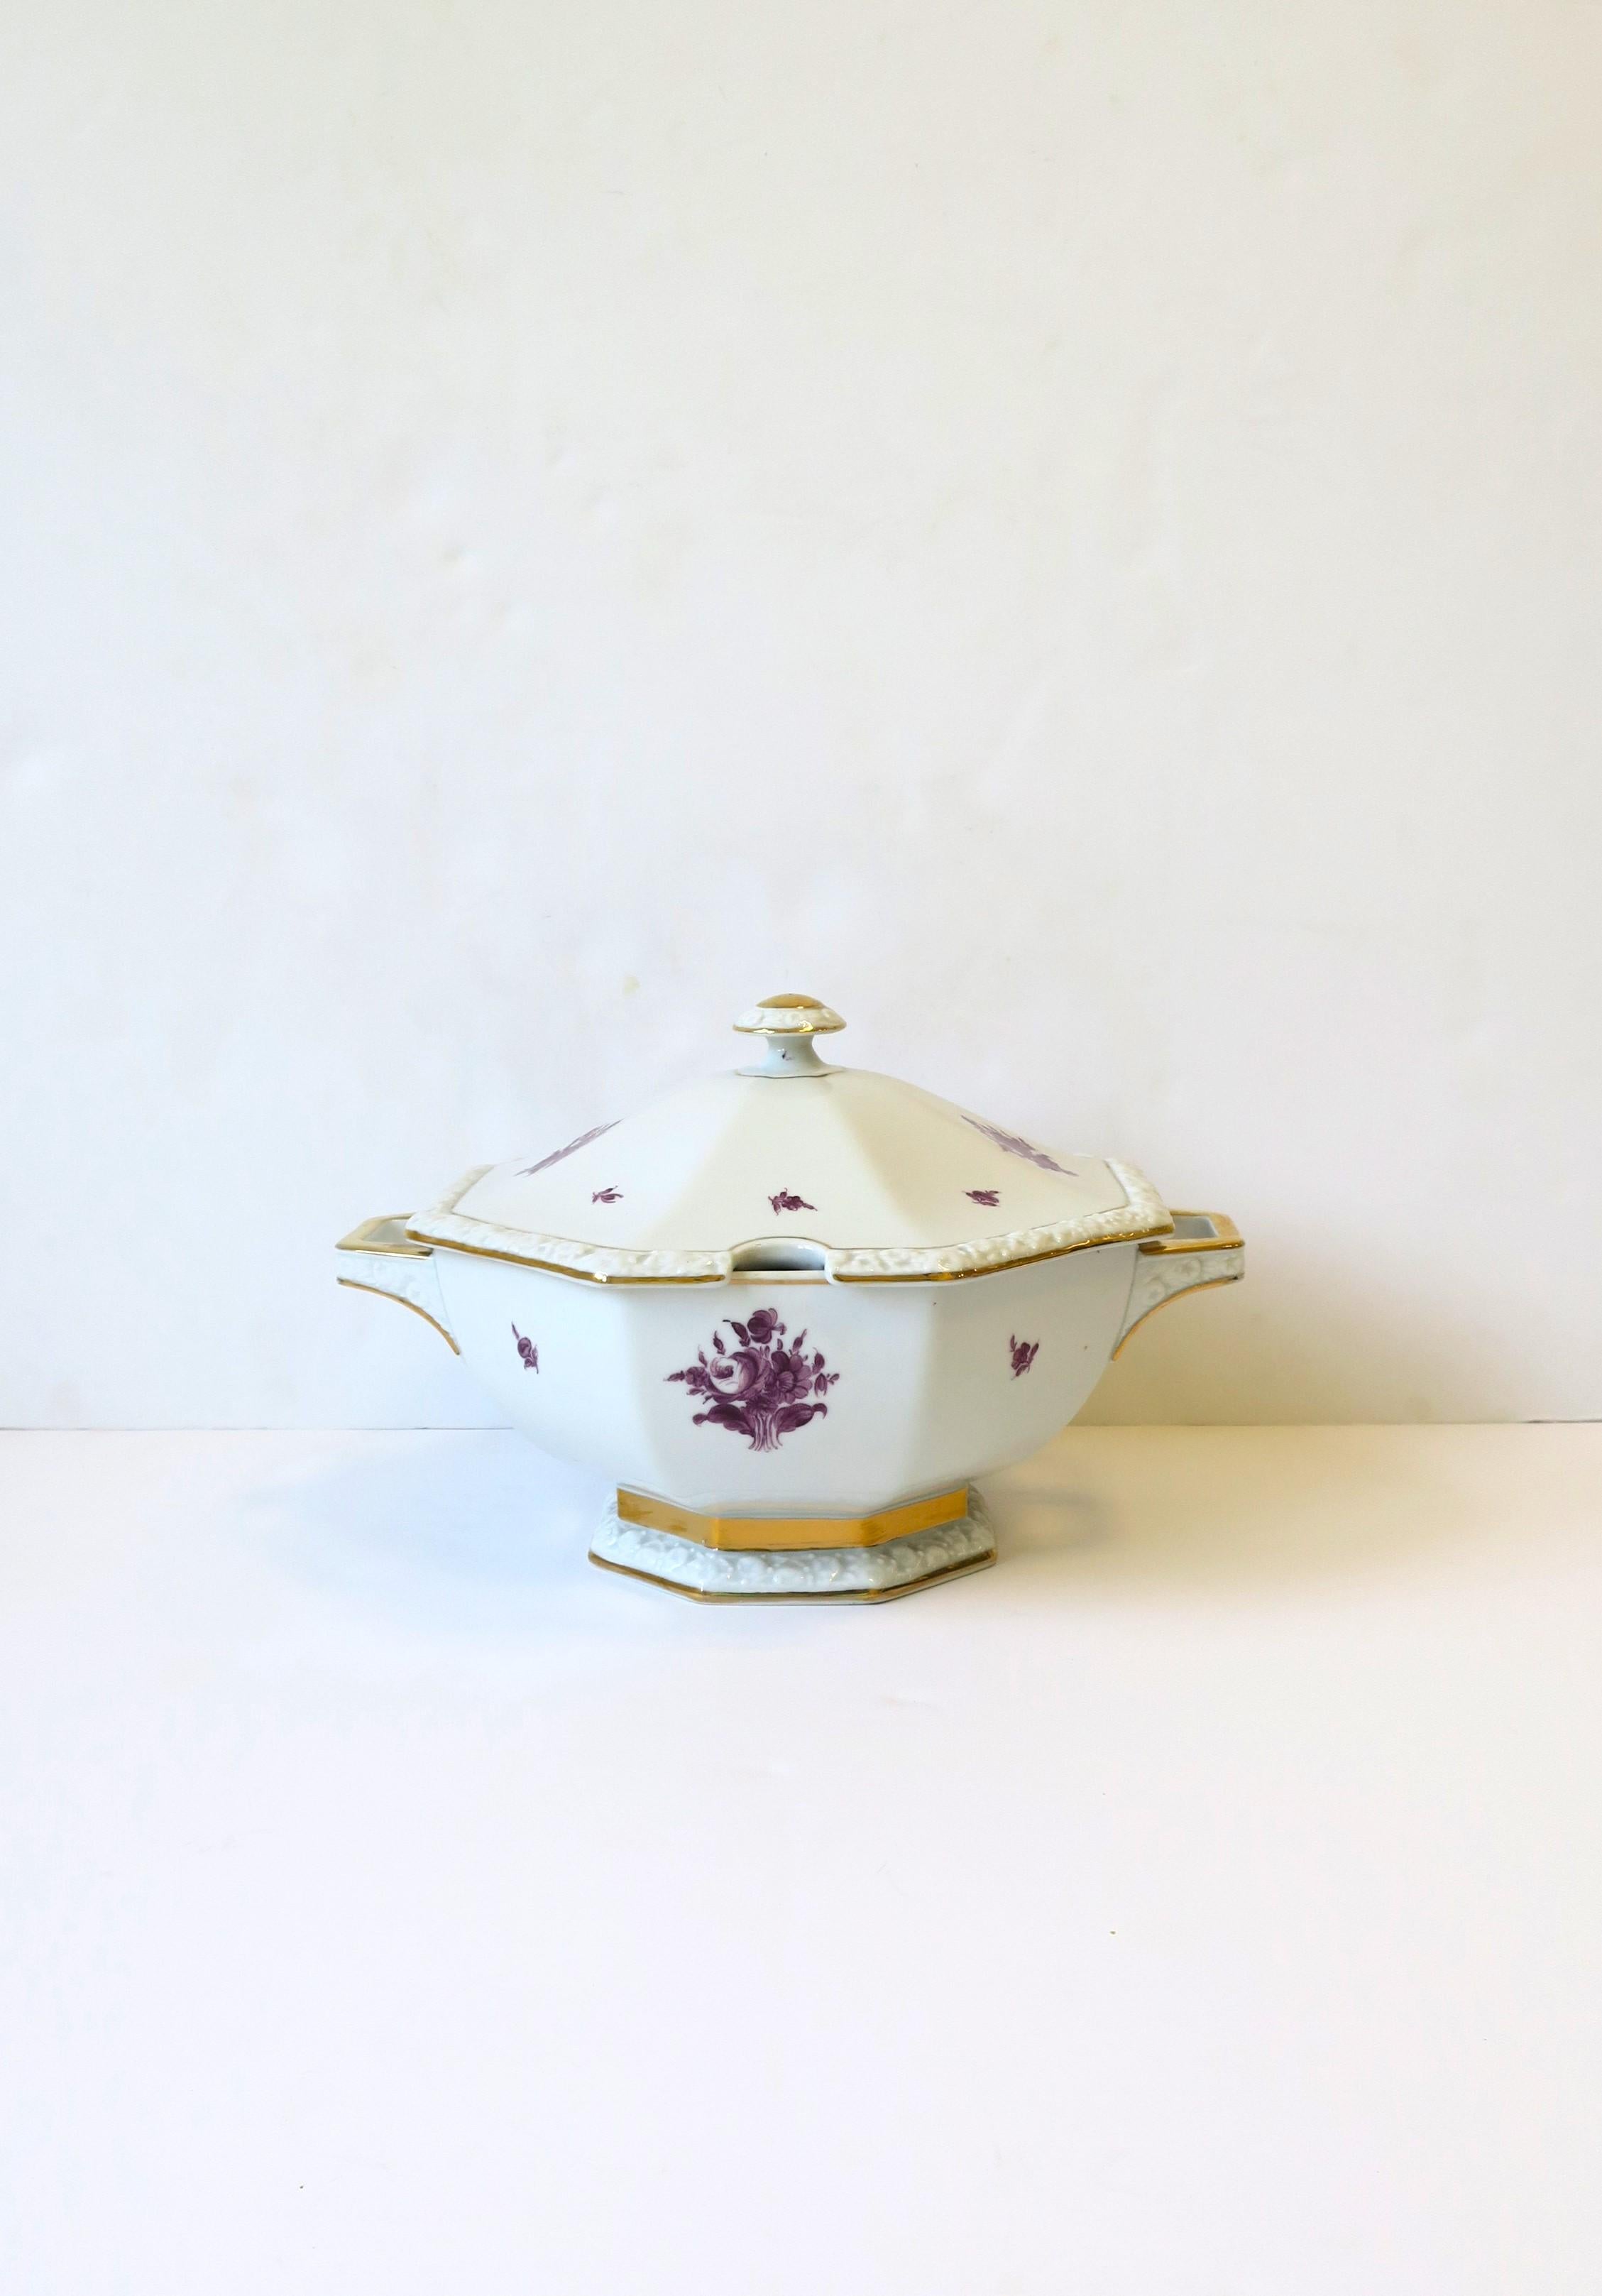 A German white porcelain soup stew tureen with hand-painted floral design and gold detail, circa mid to late-20th century, Germany. Tureen, with lid, has an octagonal shape and opening for spoon or ladle. Piece is hand-painted by artist with artist